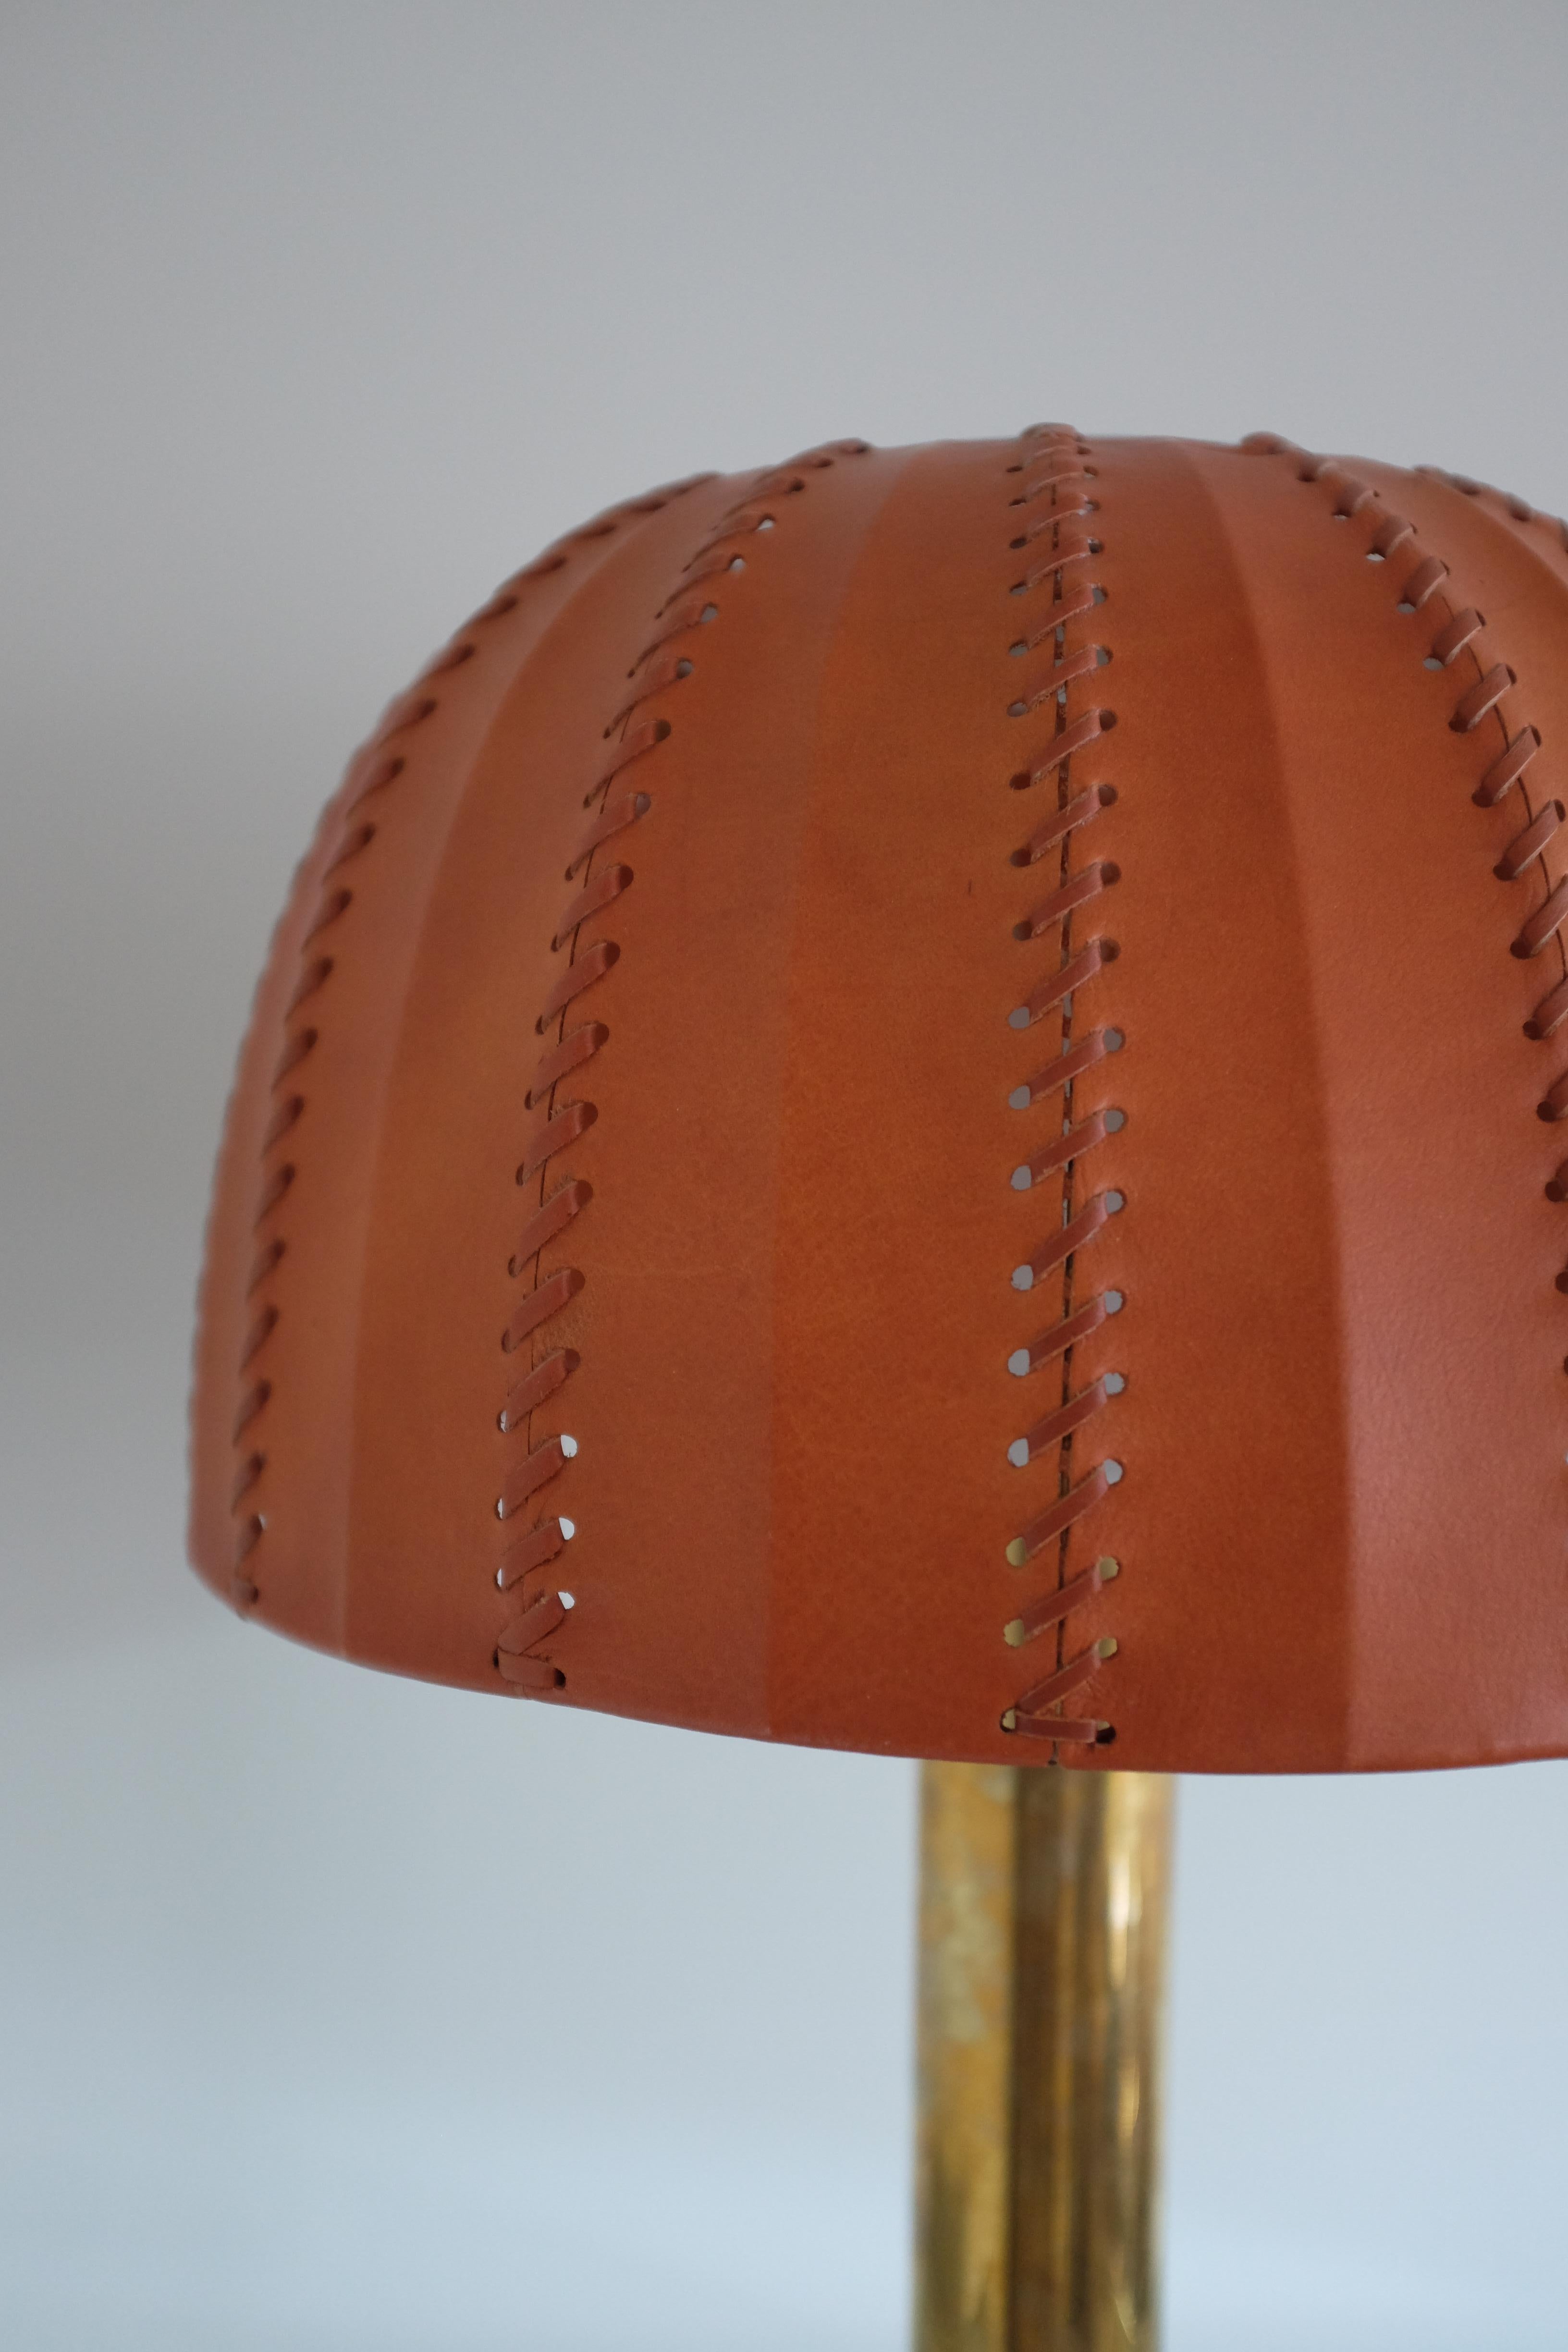 Rare Leather and Brass Table lamp in modell B204 or also known as 